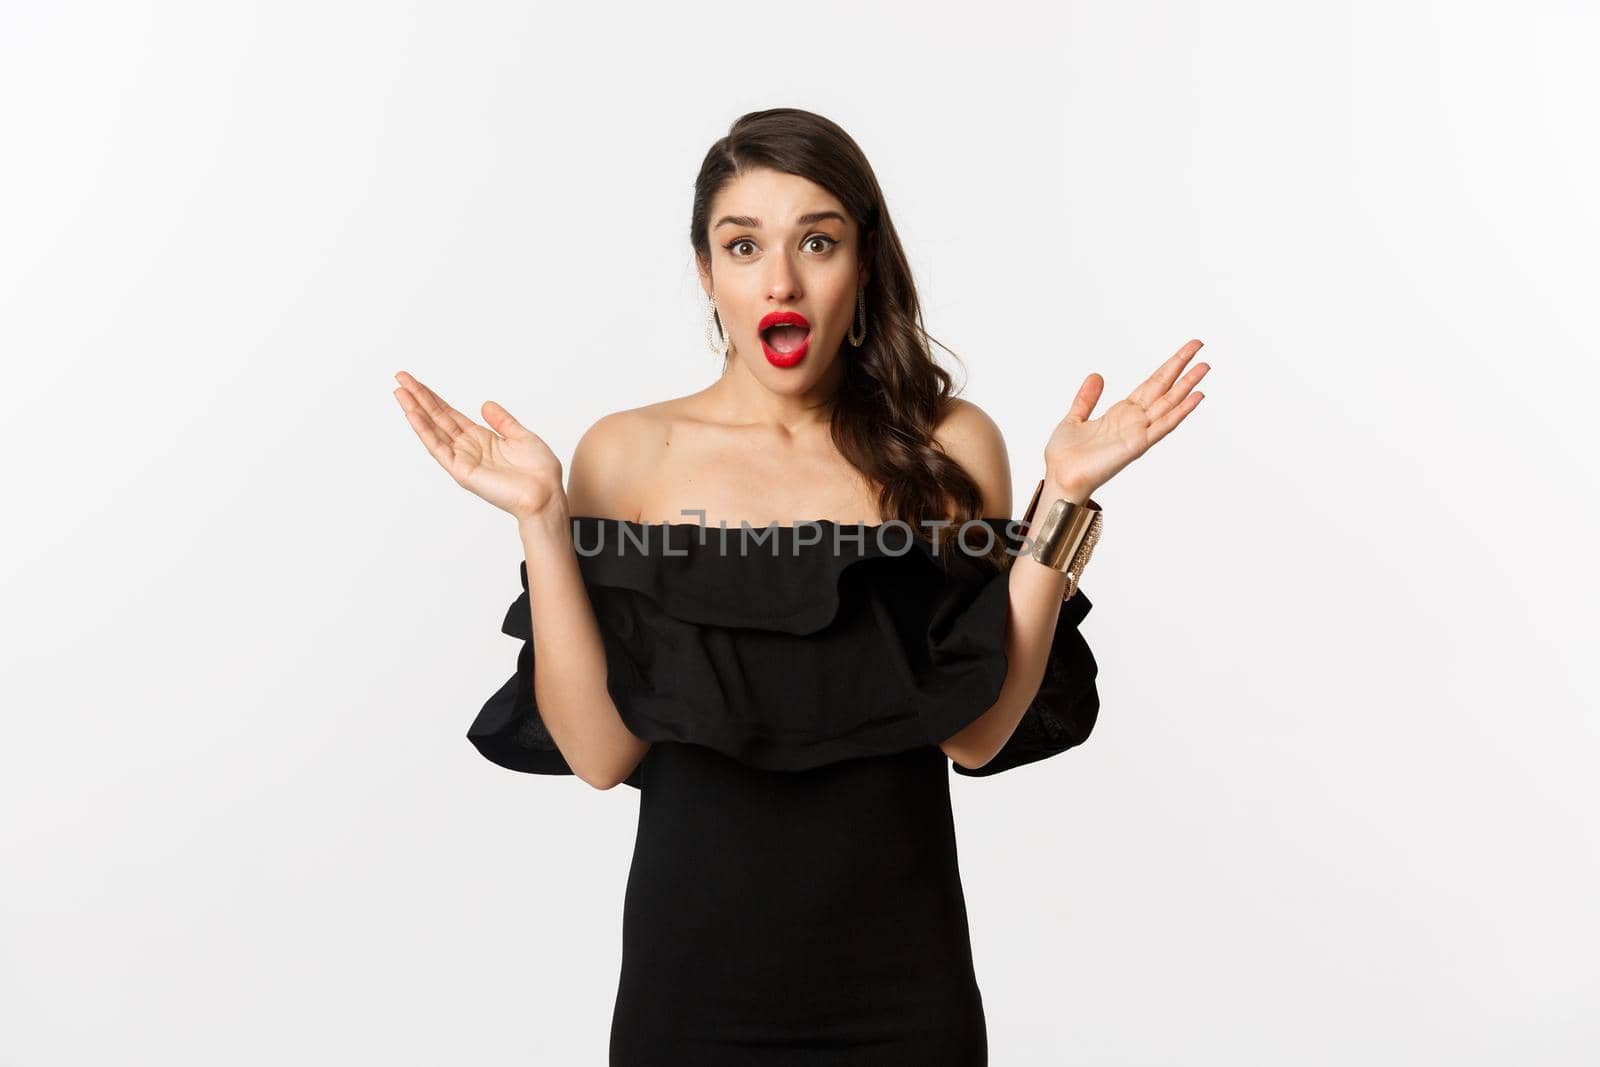 Beauty and fashion concept. Excited beautiful woman looking with amazement at surprise, reacting to good news, standing in black dress with makeup on, white background.